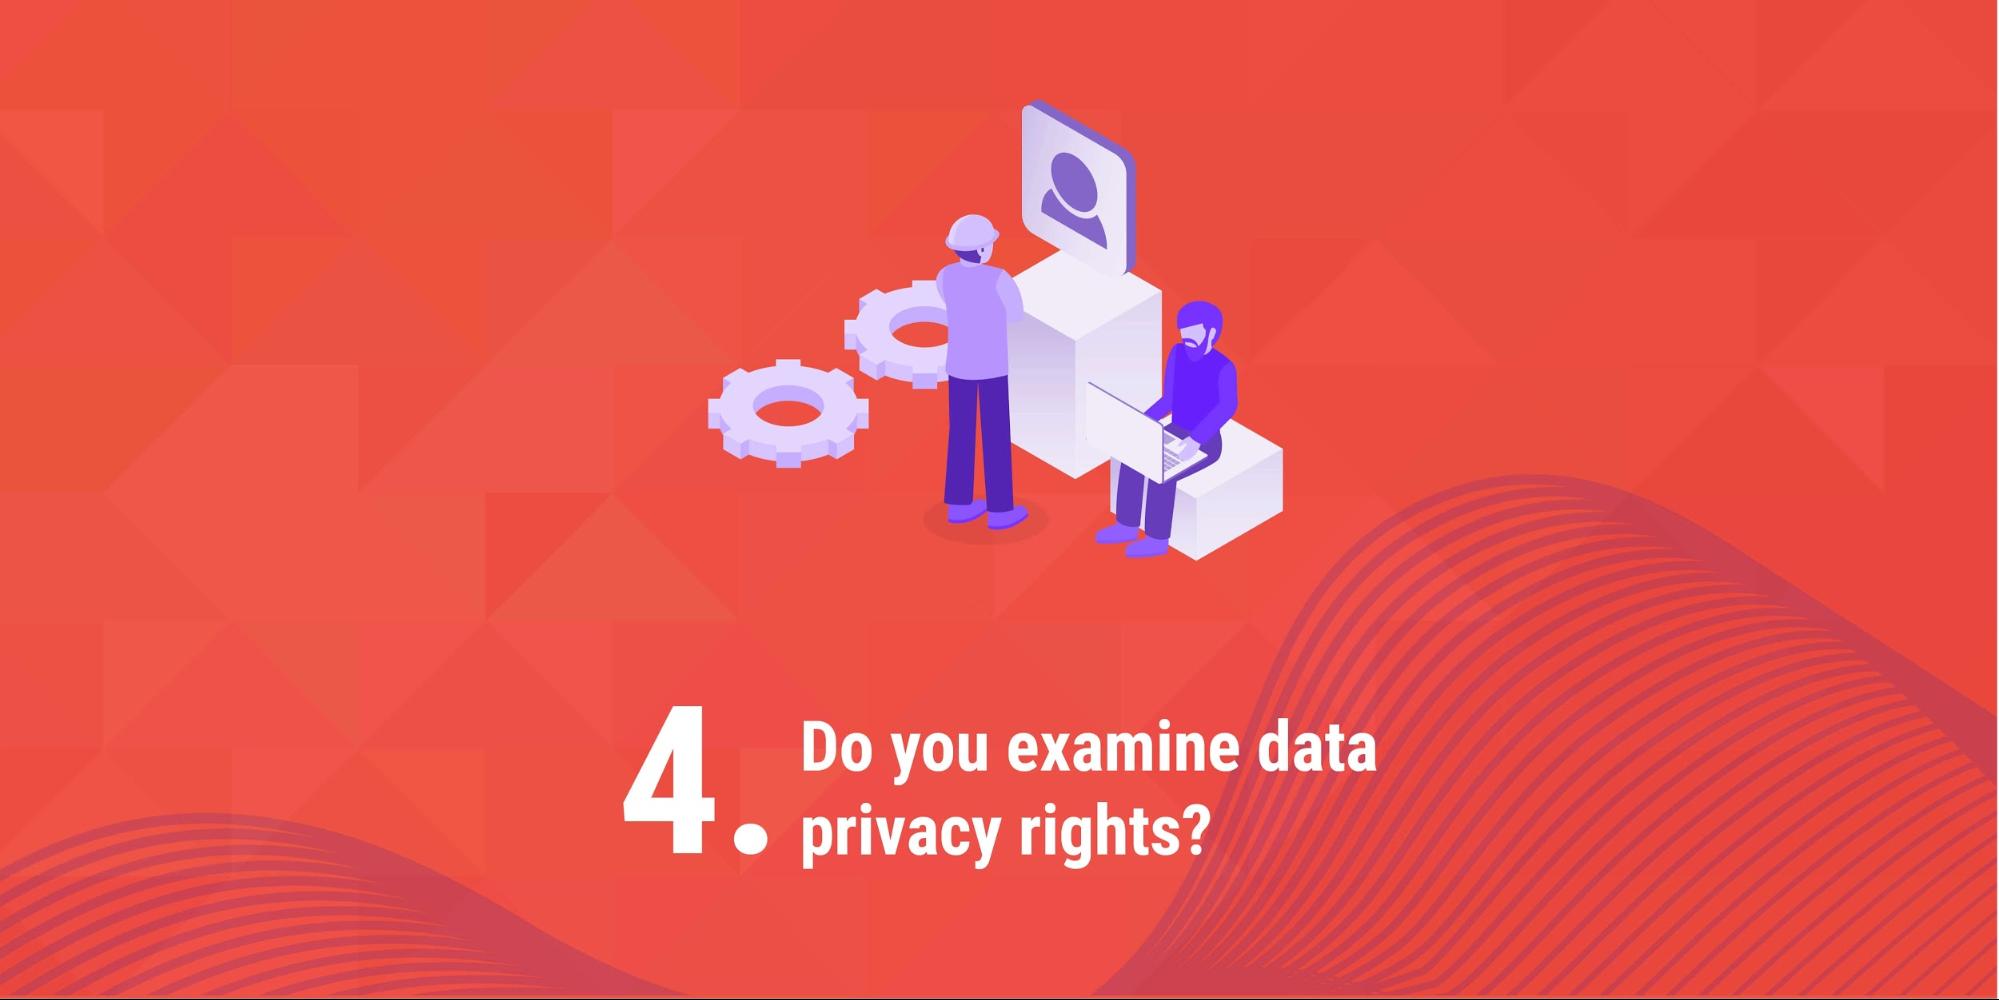 4. Do you examine data privacy rights?